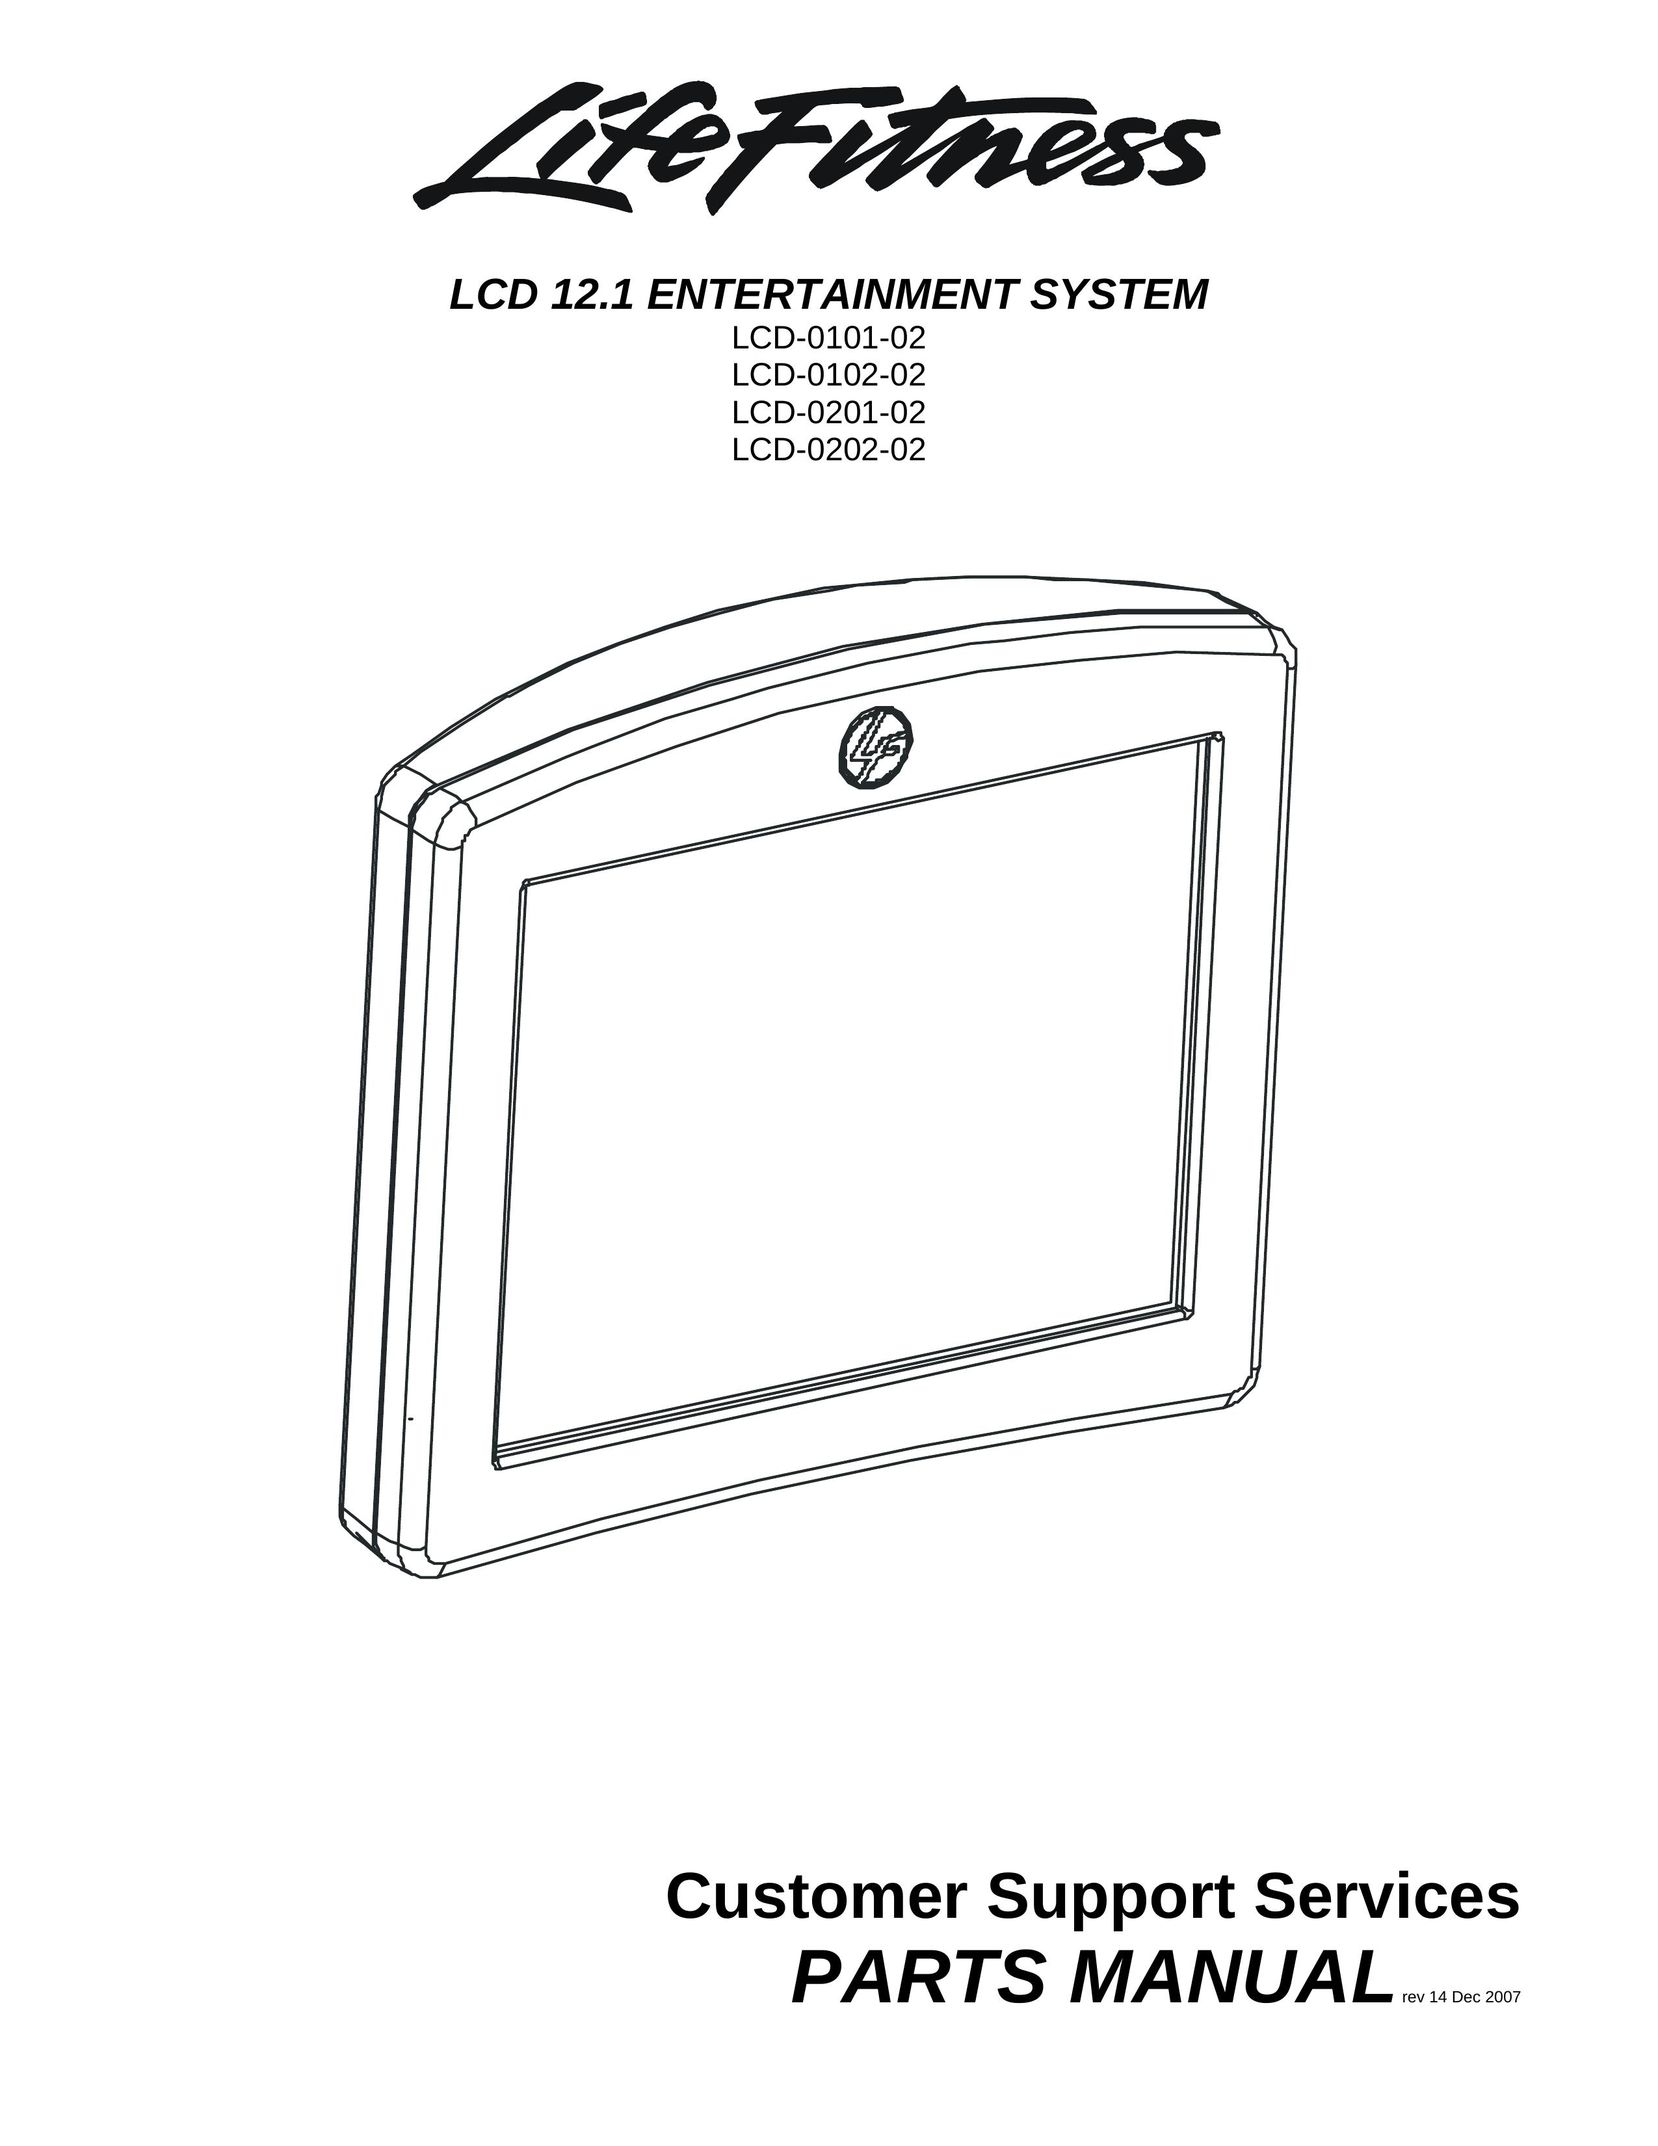 Life Fitness LCD-0202-02 Home Theater System User Manual